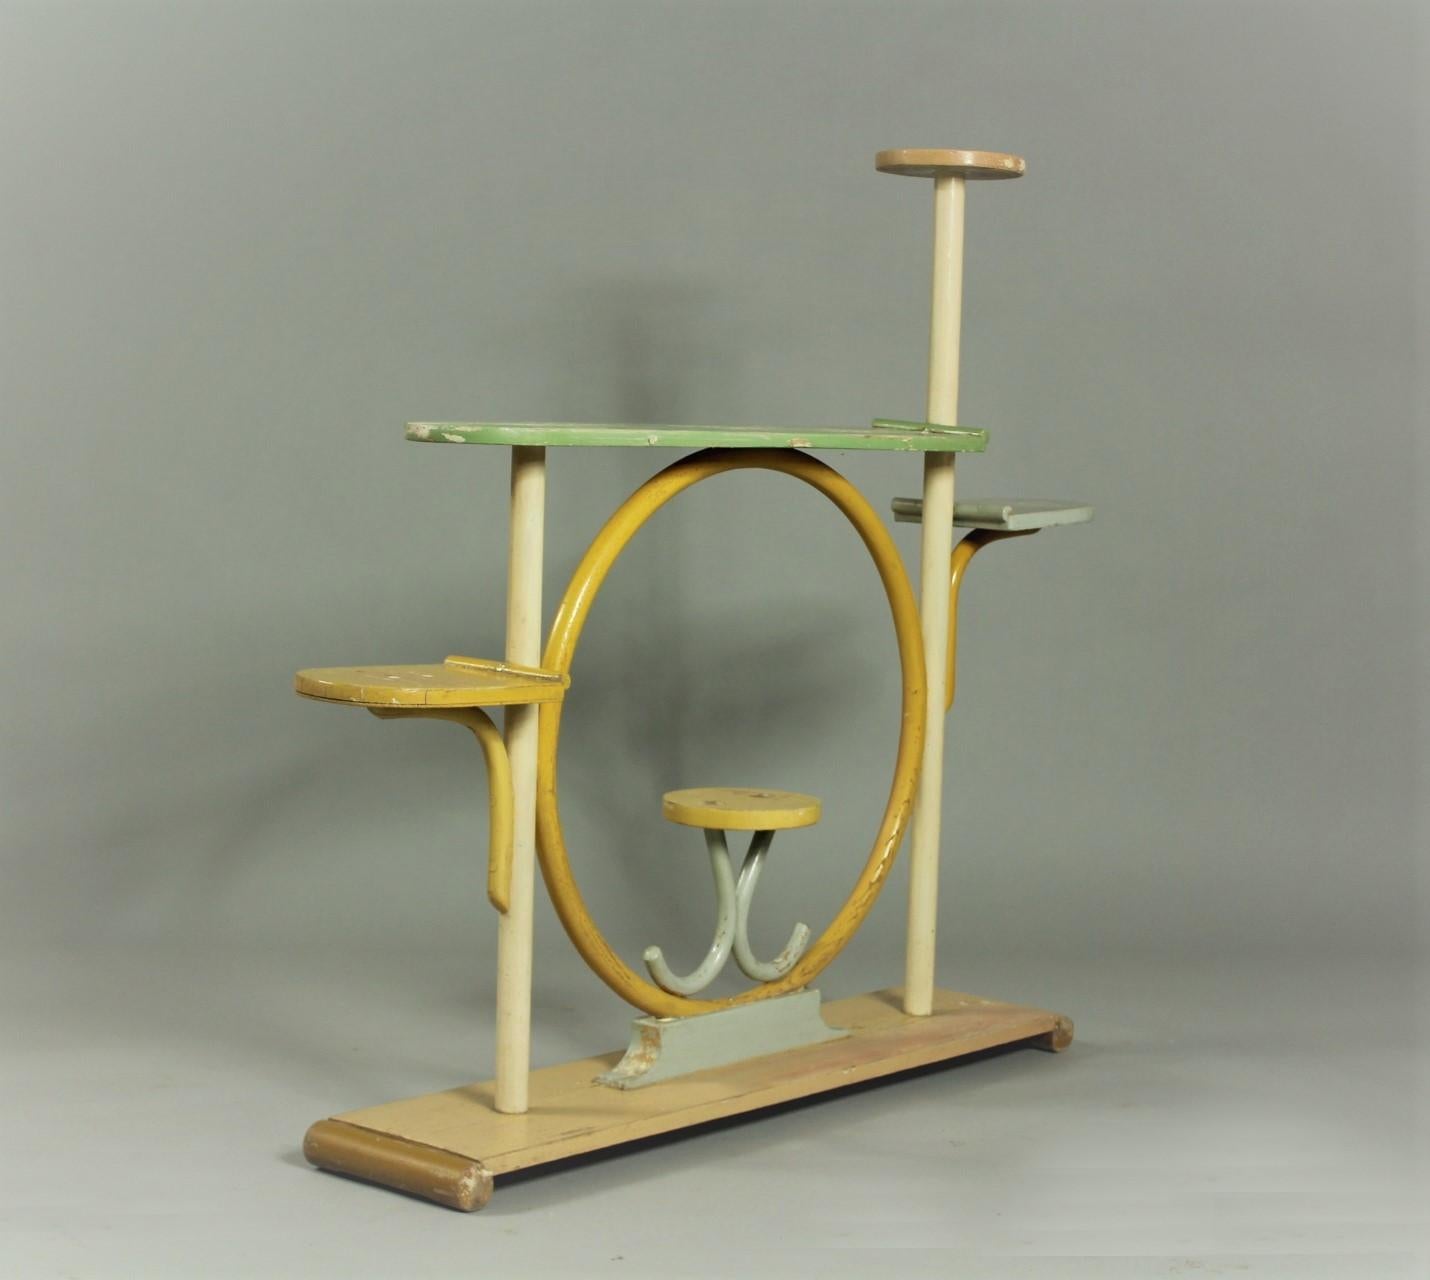 Thonet flower stand from the 1930s. The material is bentwood and lacquered solid wood. It is labeled with Thonet factory label. This flower stand is in original condition with patina.